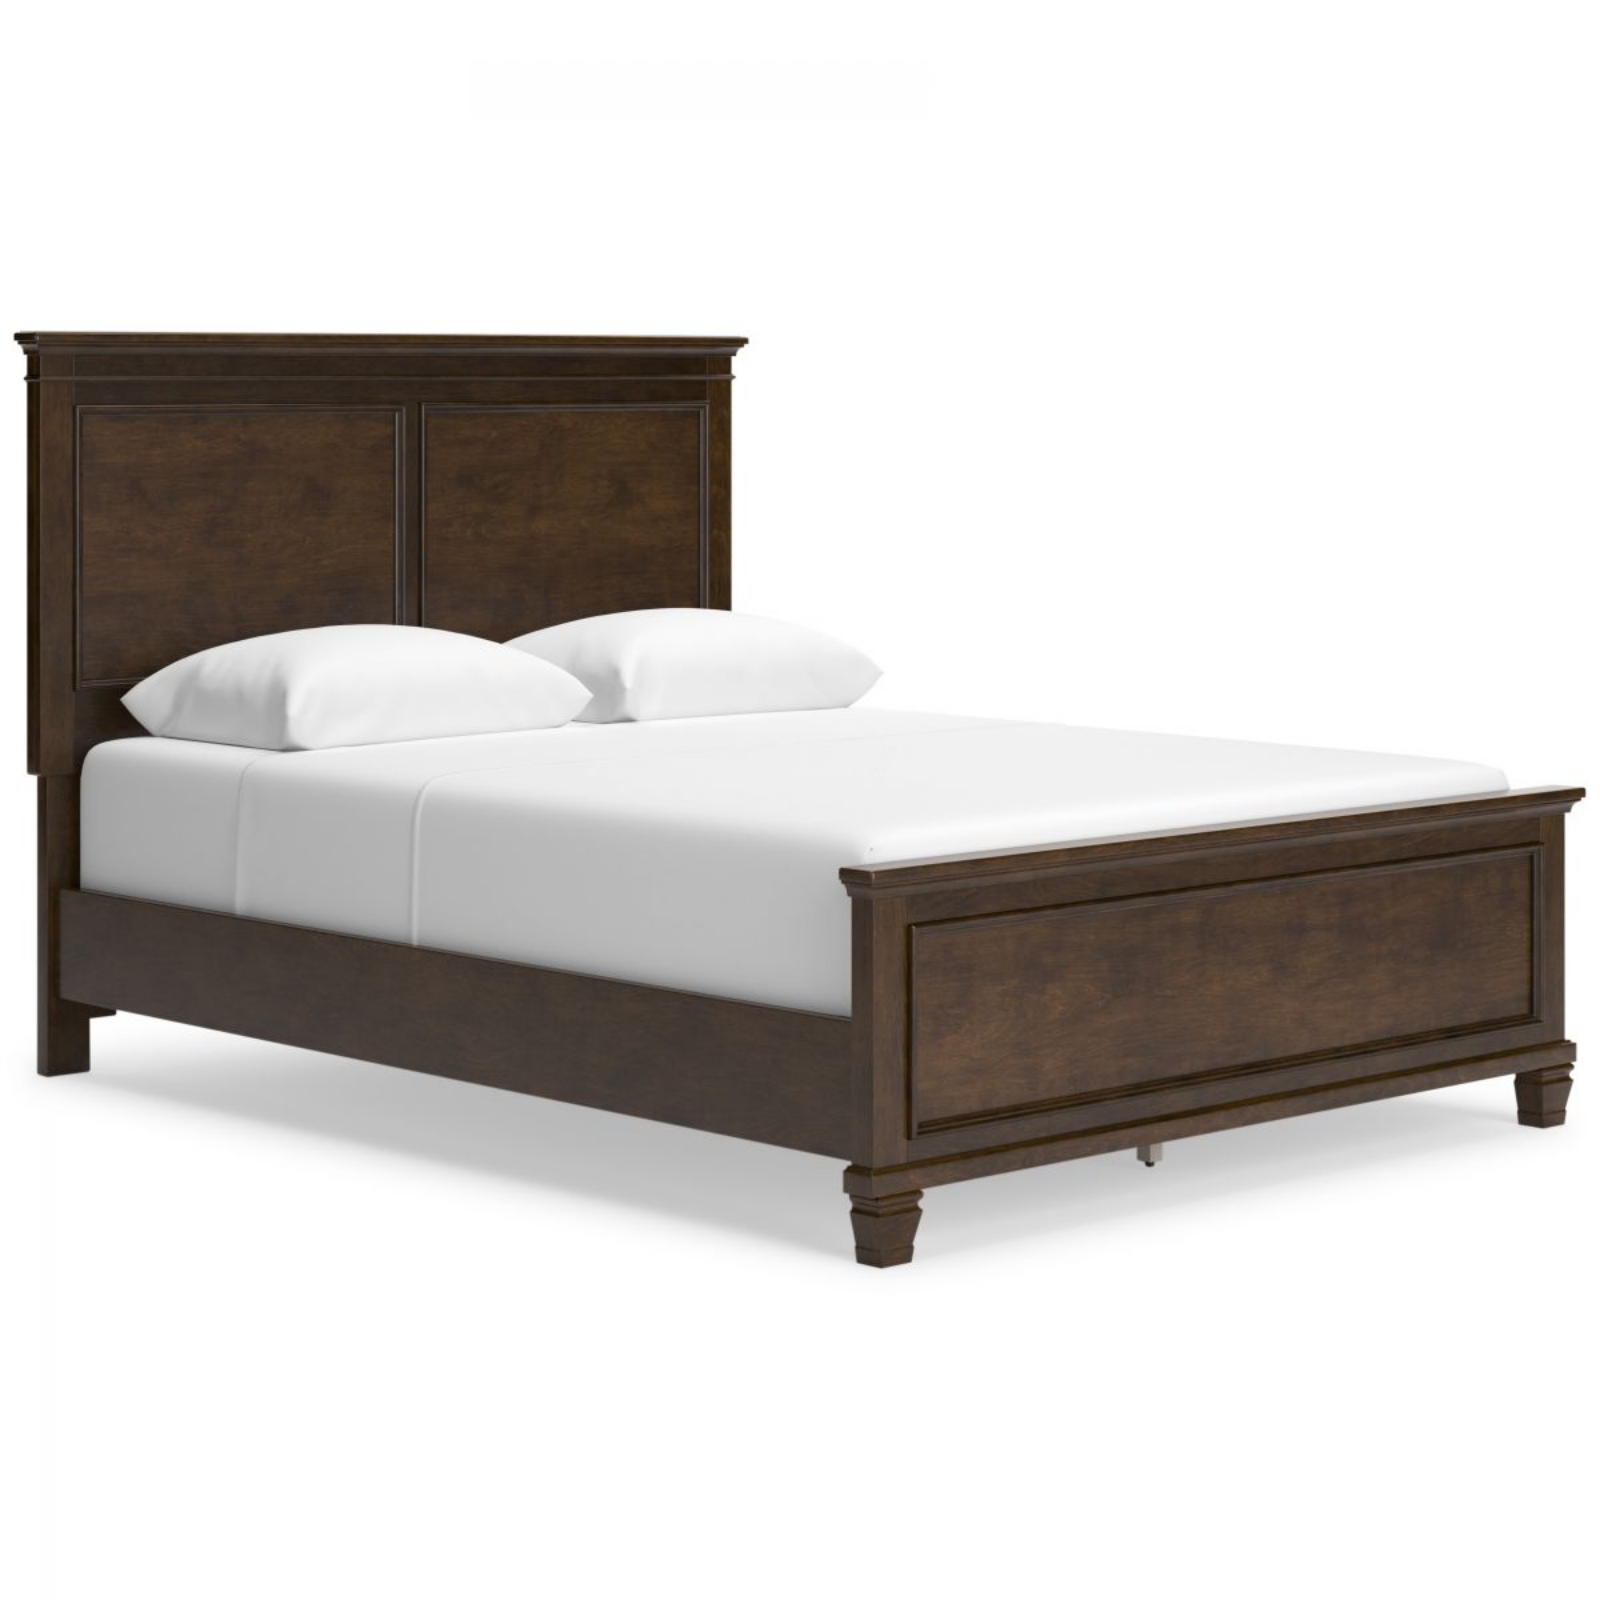 Picture of Danabrin Queen Size Bed